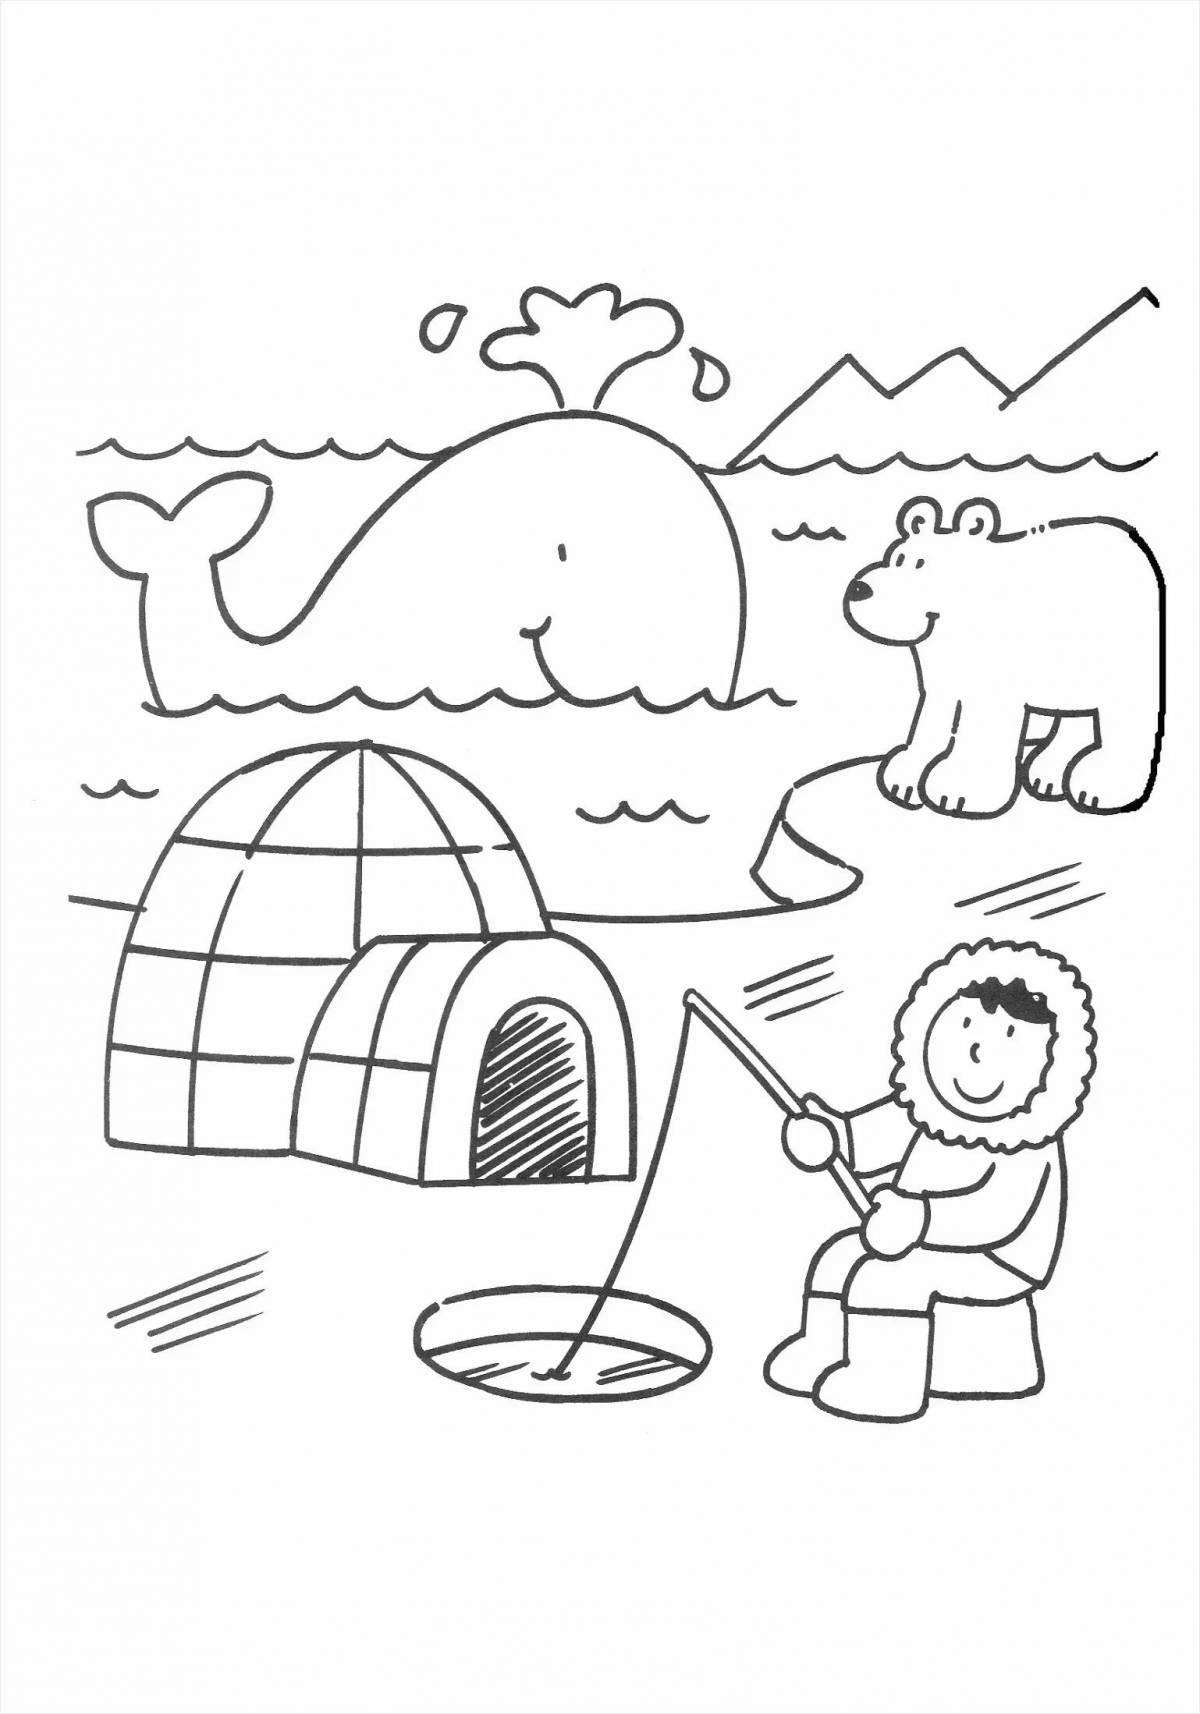 Shiny north pole coloring book for kids